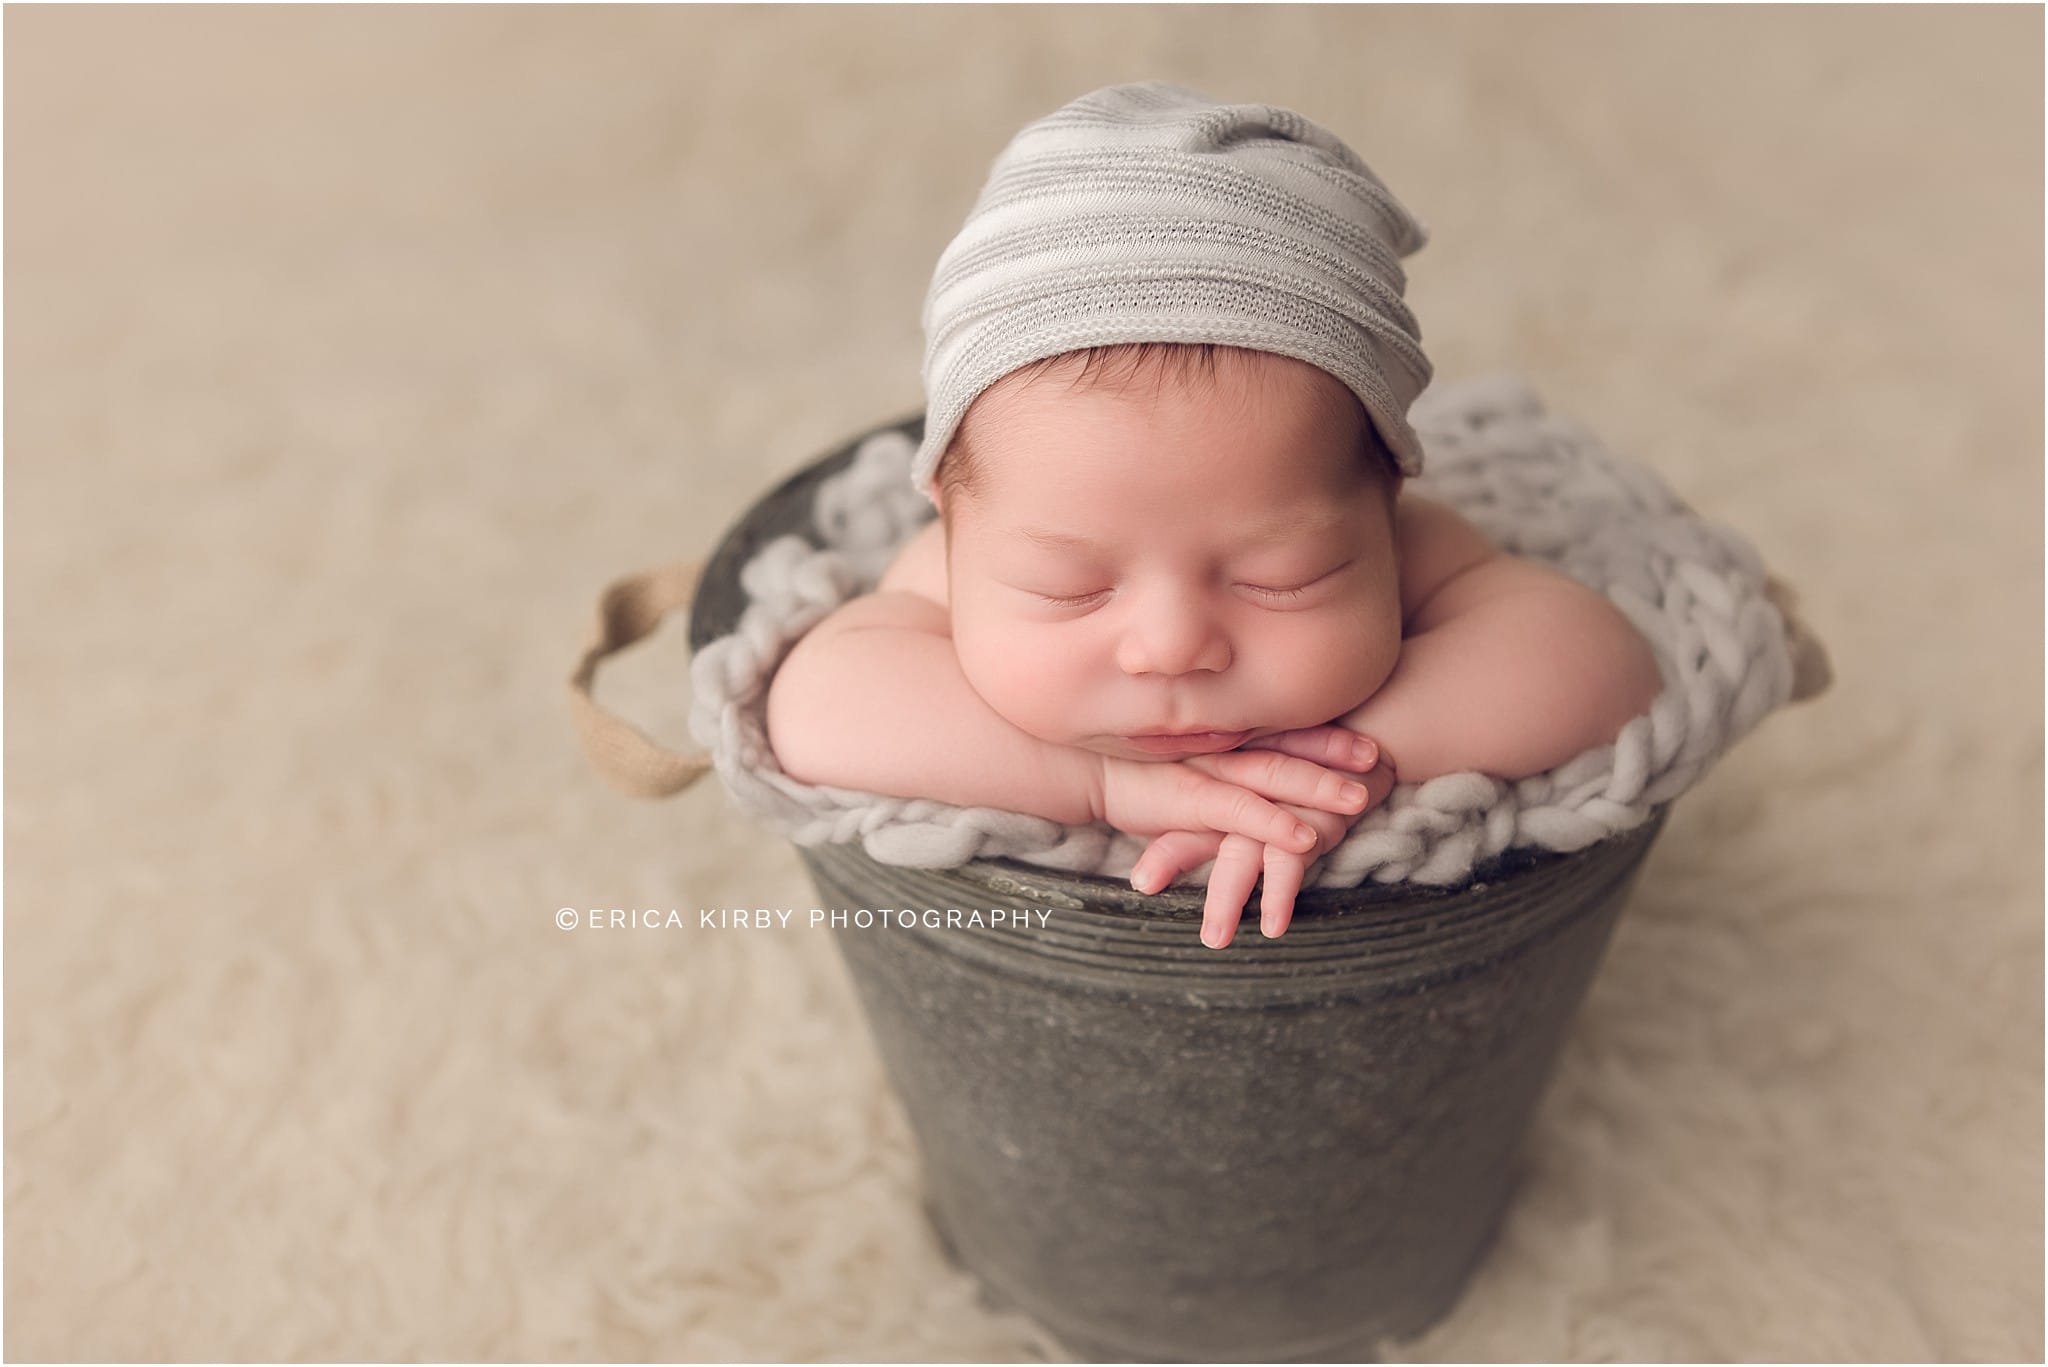 Newborn Photography NWA | Baby boy newborn photography session in Bentonville Arkansas | newborn baby boy posed in metal bucket with slouch hat